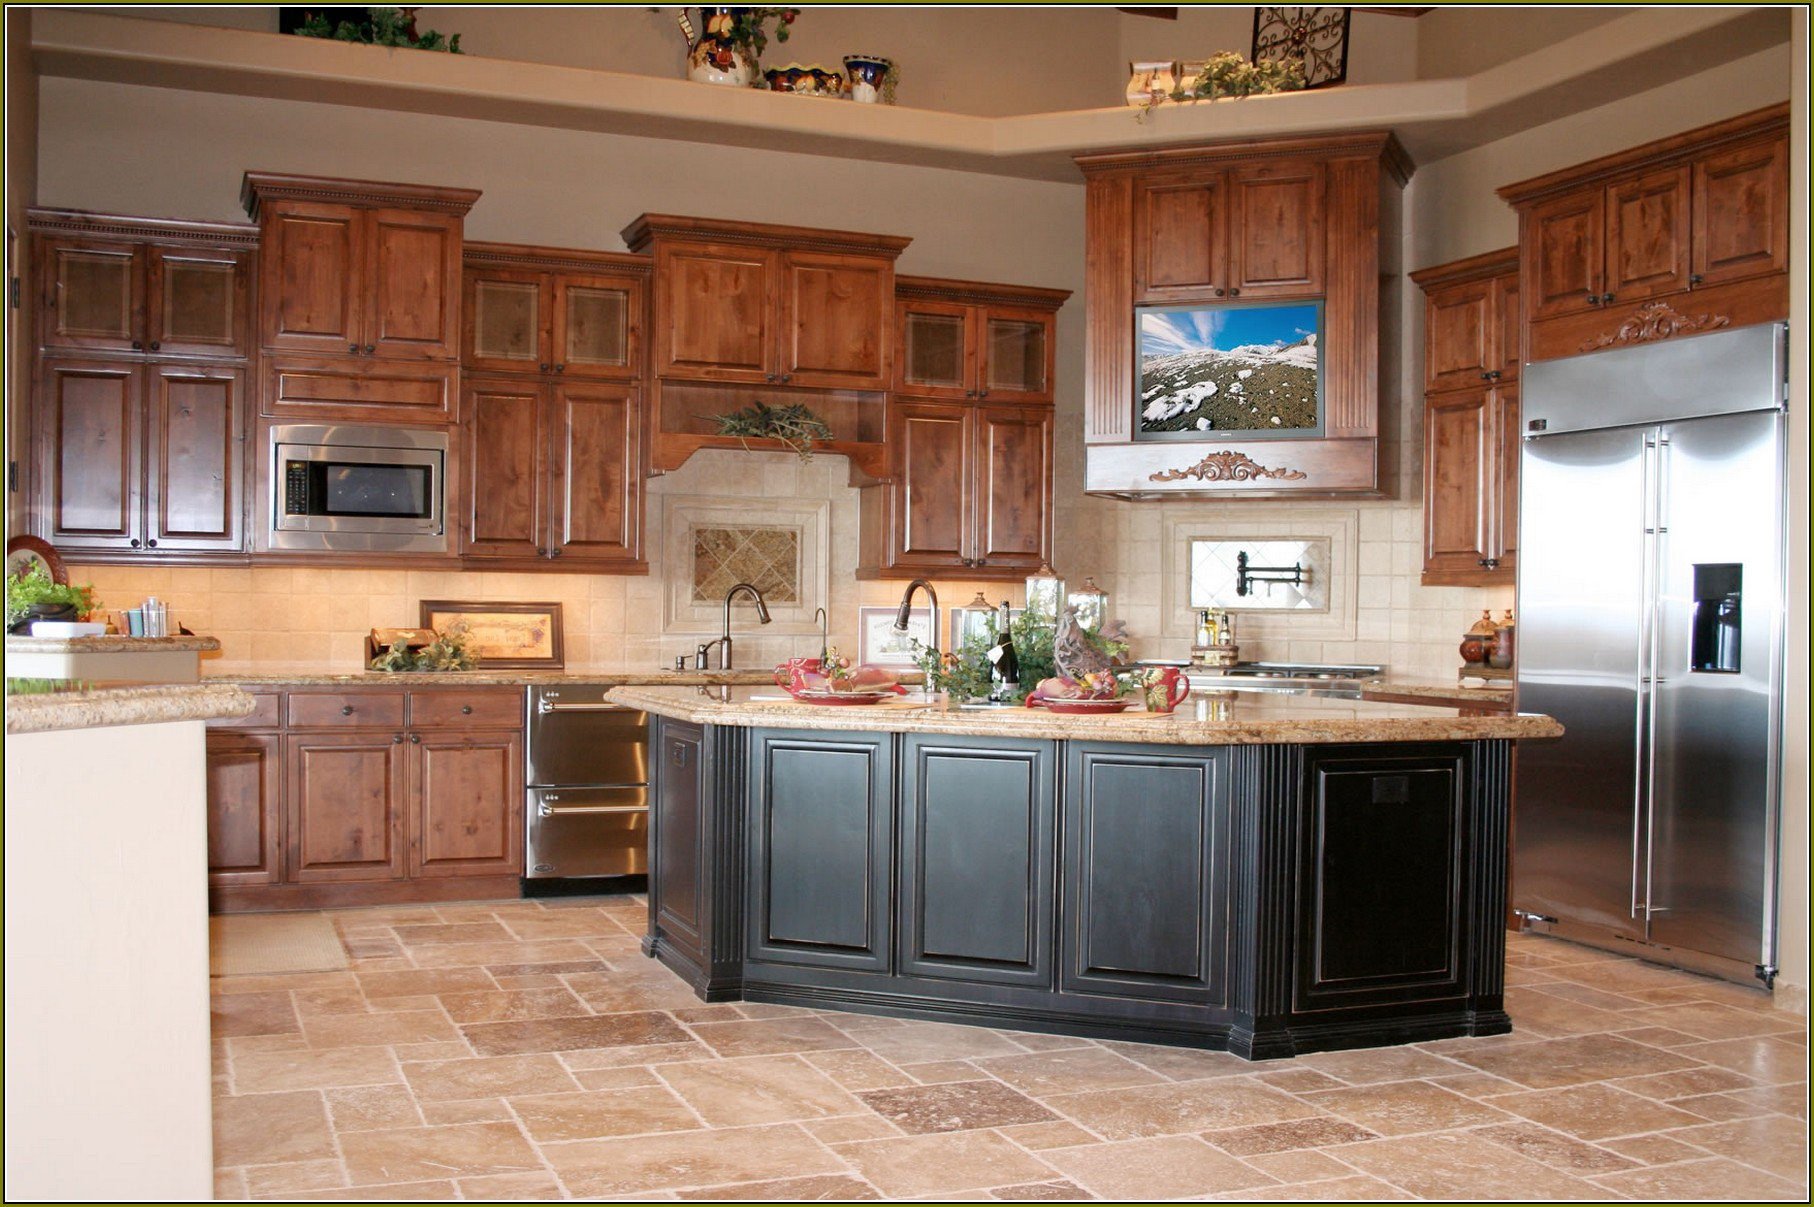 Kitchen Cabinets Doors Home Depot
 Kitchen Decoration Perfect Preeminent Home Depot Cabinets